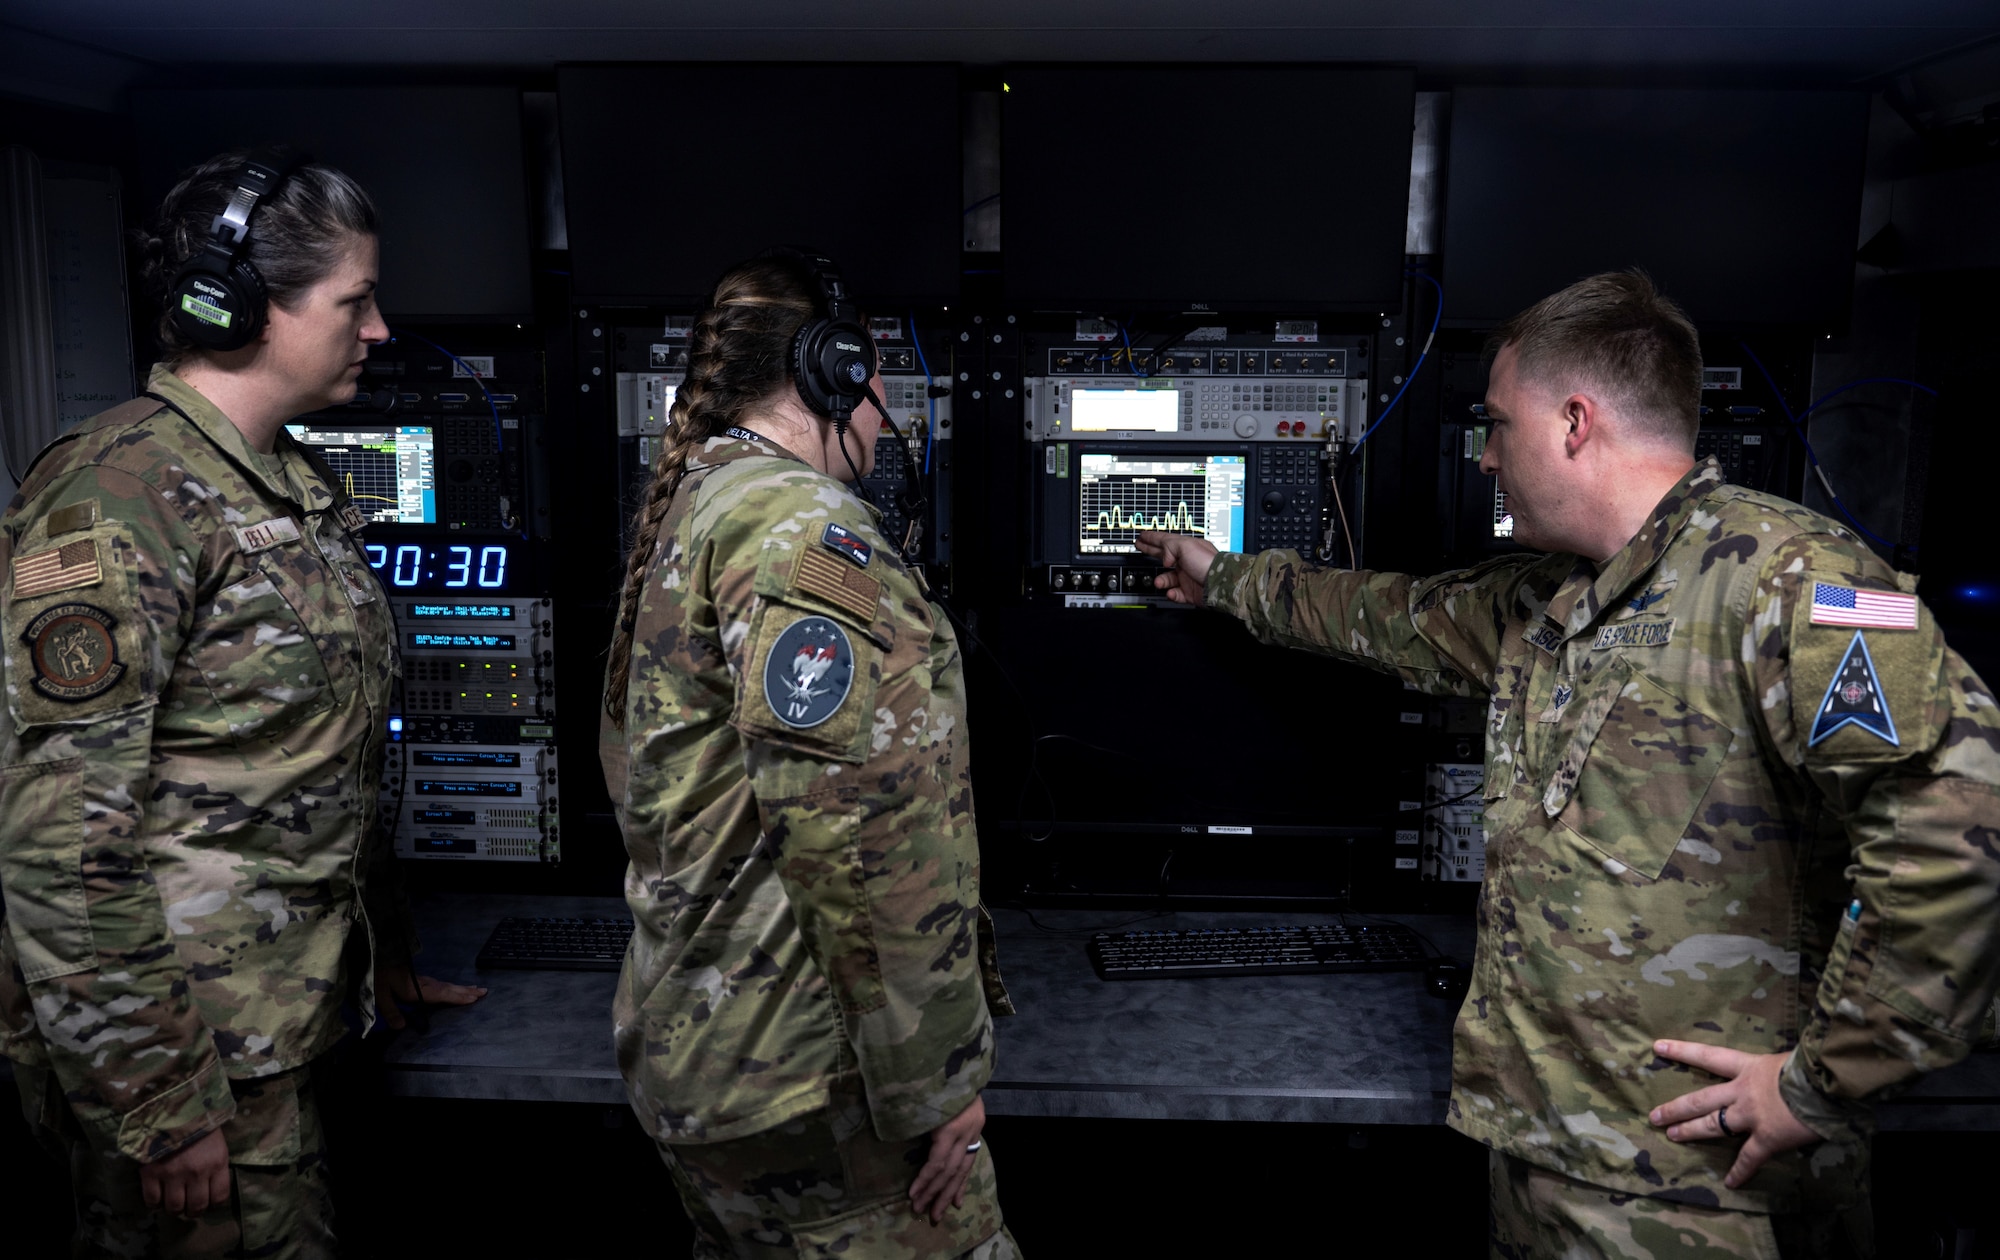 Service members from the U.S. Space Force and U.S. Air Force demonstrate the functionality of range equipment